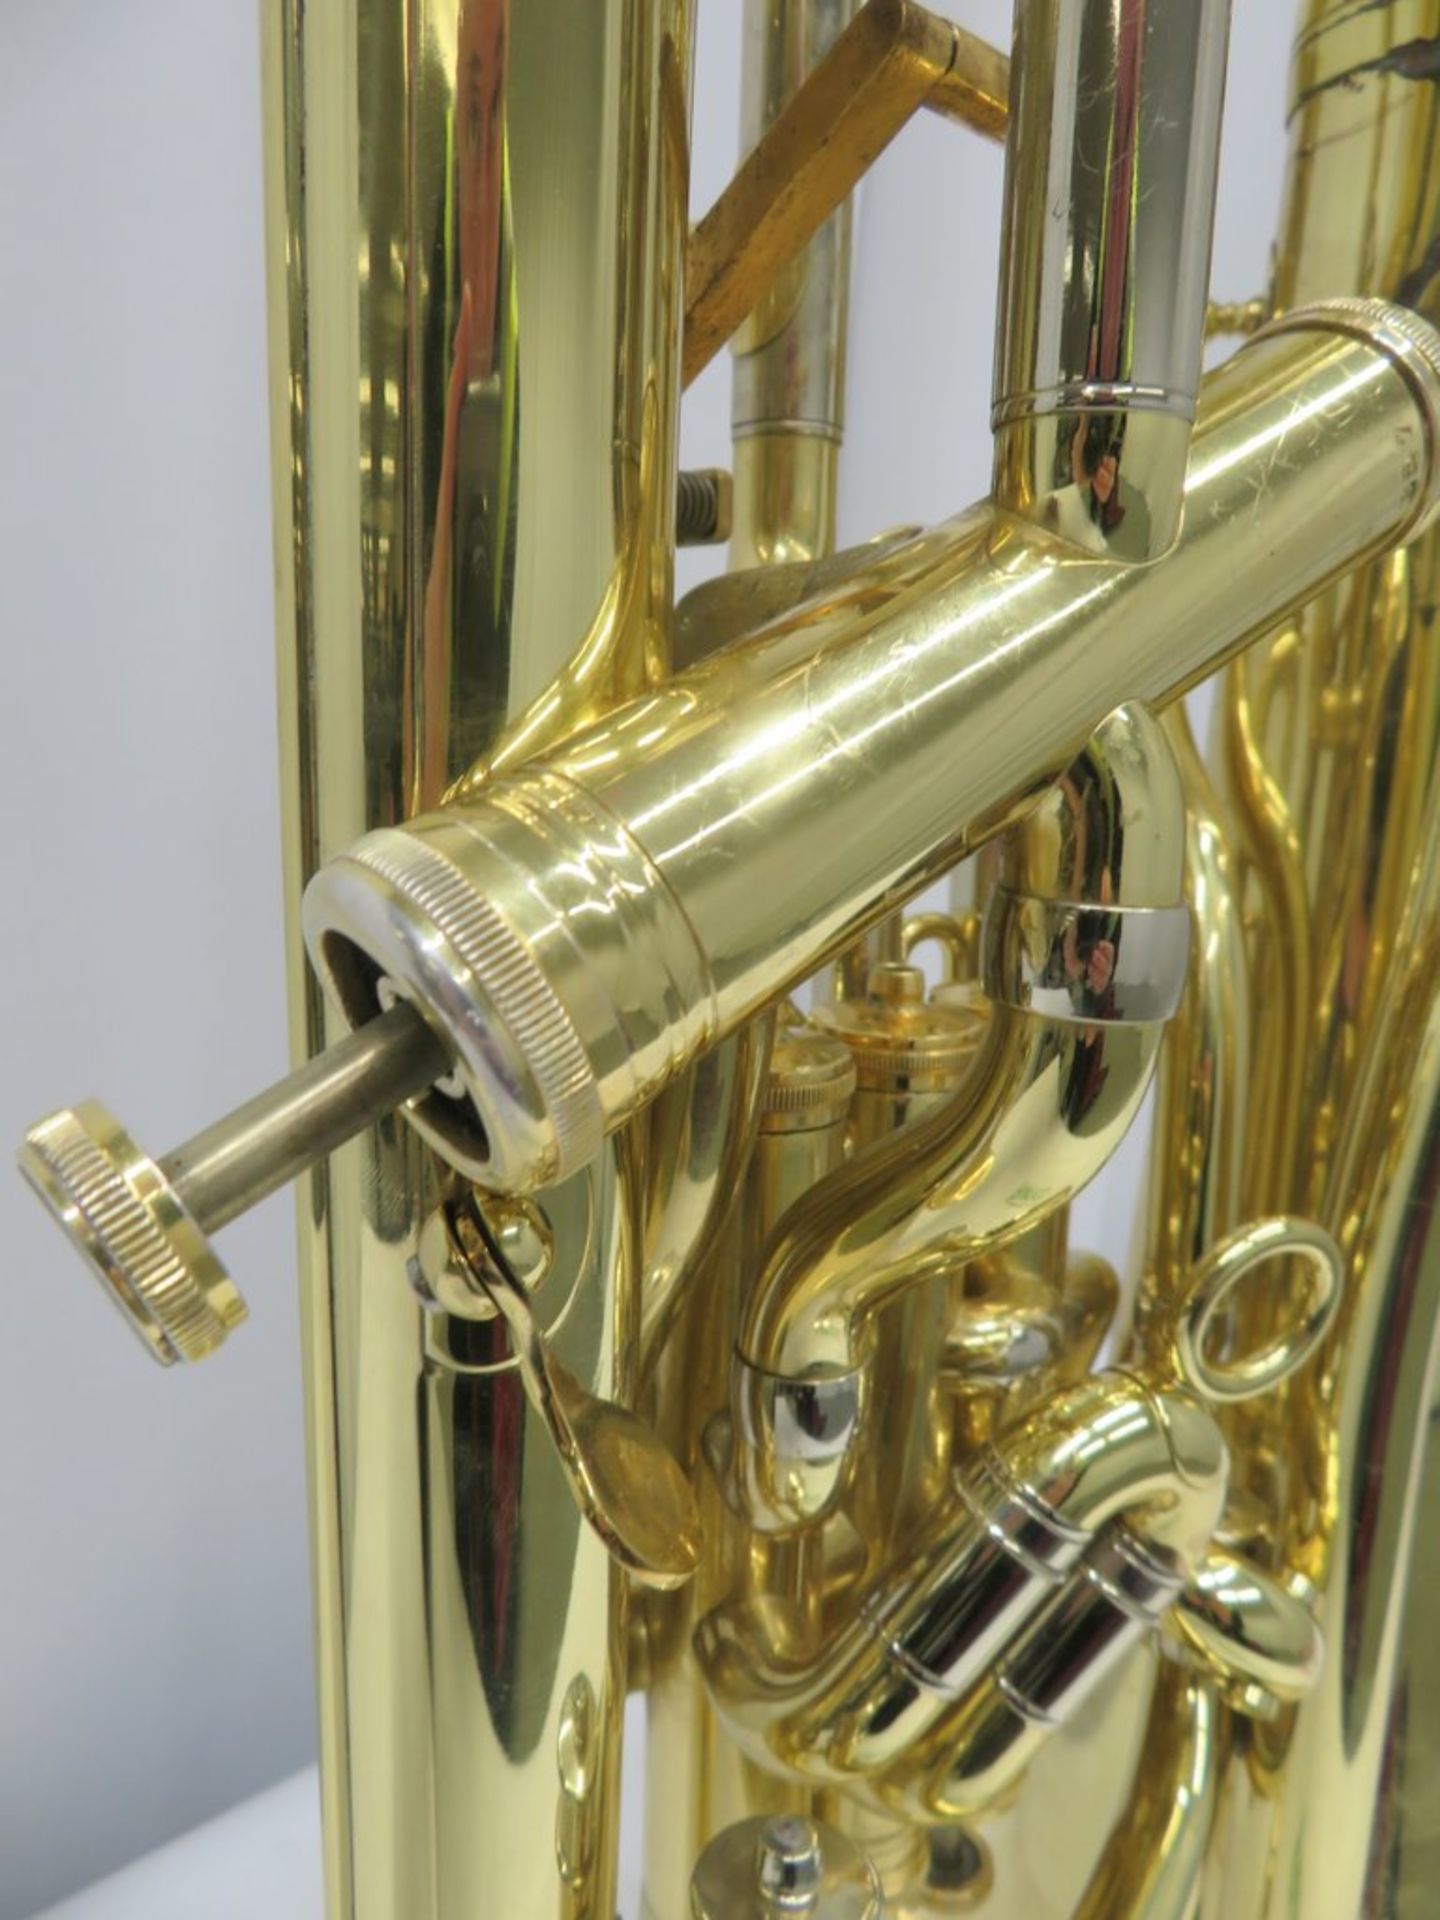 Besson Prestige BE2052 Euphonium With Case. Serial Number: 08300275. Please Note This Ite - Image 11 of 16